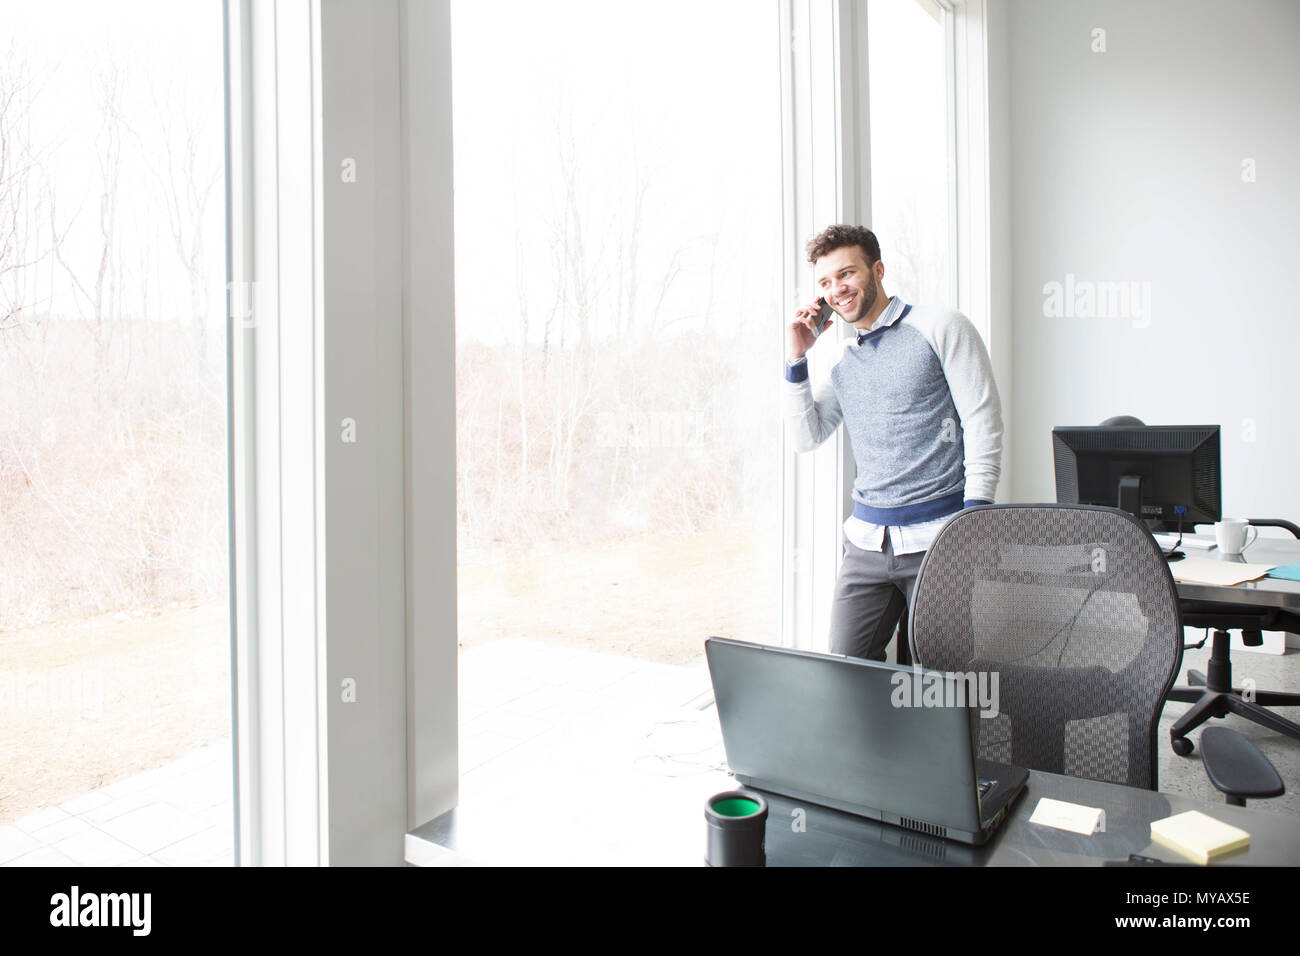 A young businessman looks out an office window while chatting on a cellphone. Stock Photo